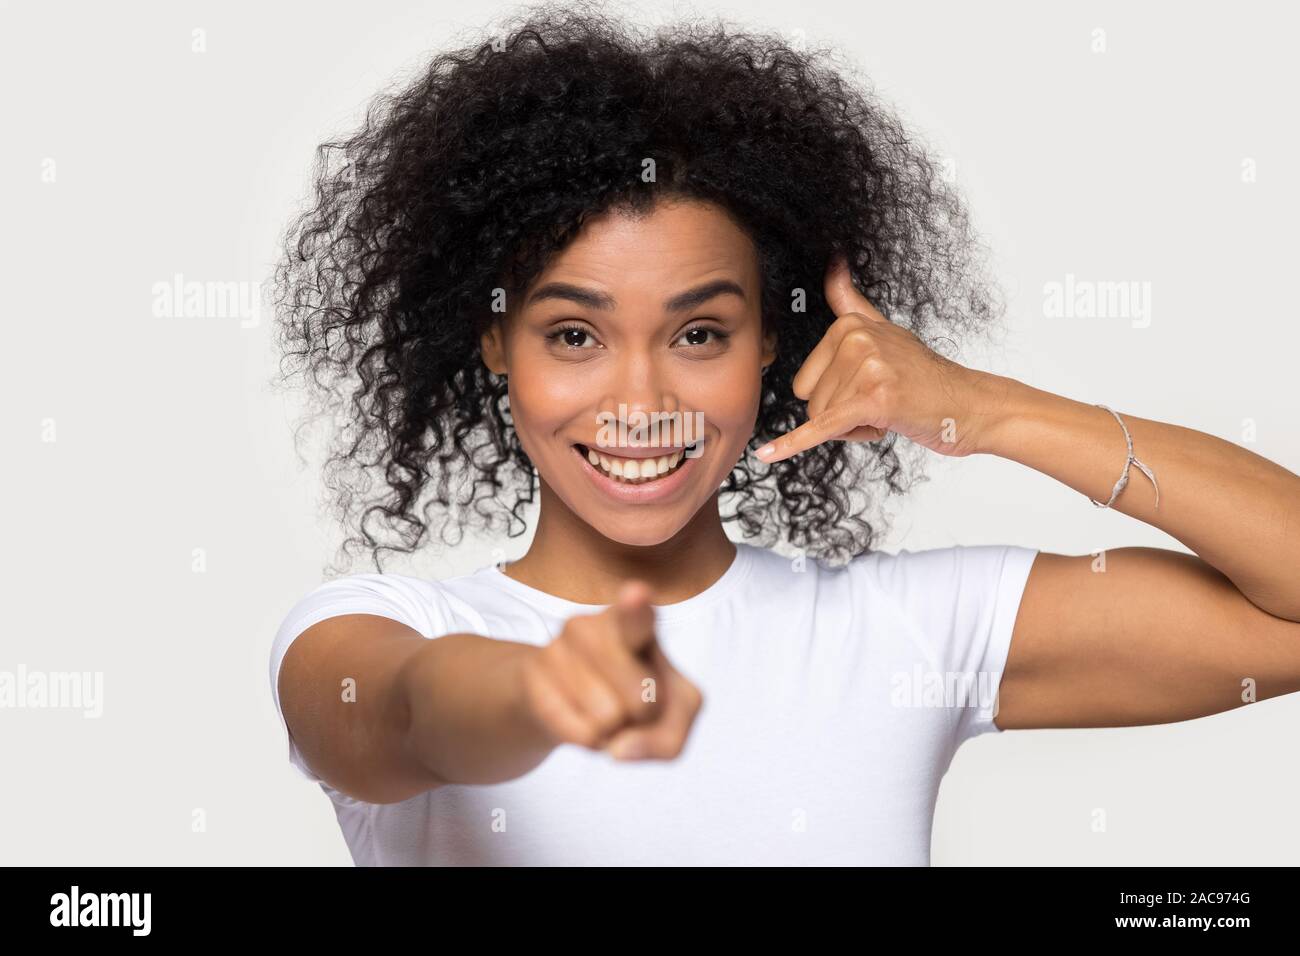 Attractive smiling African American woman showing call me gesture Stock Photo